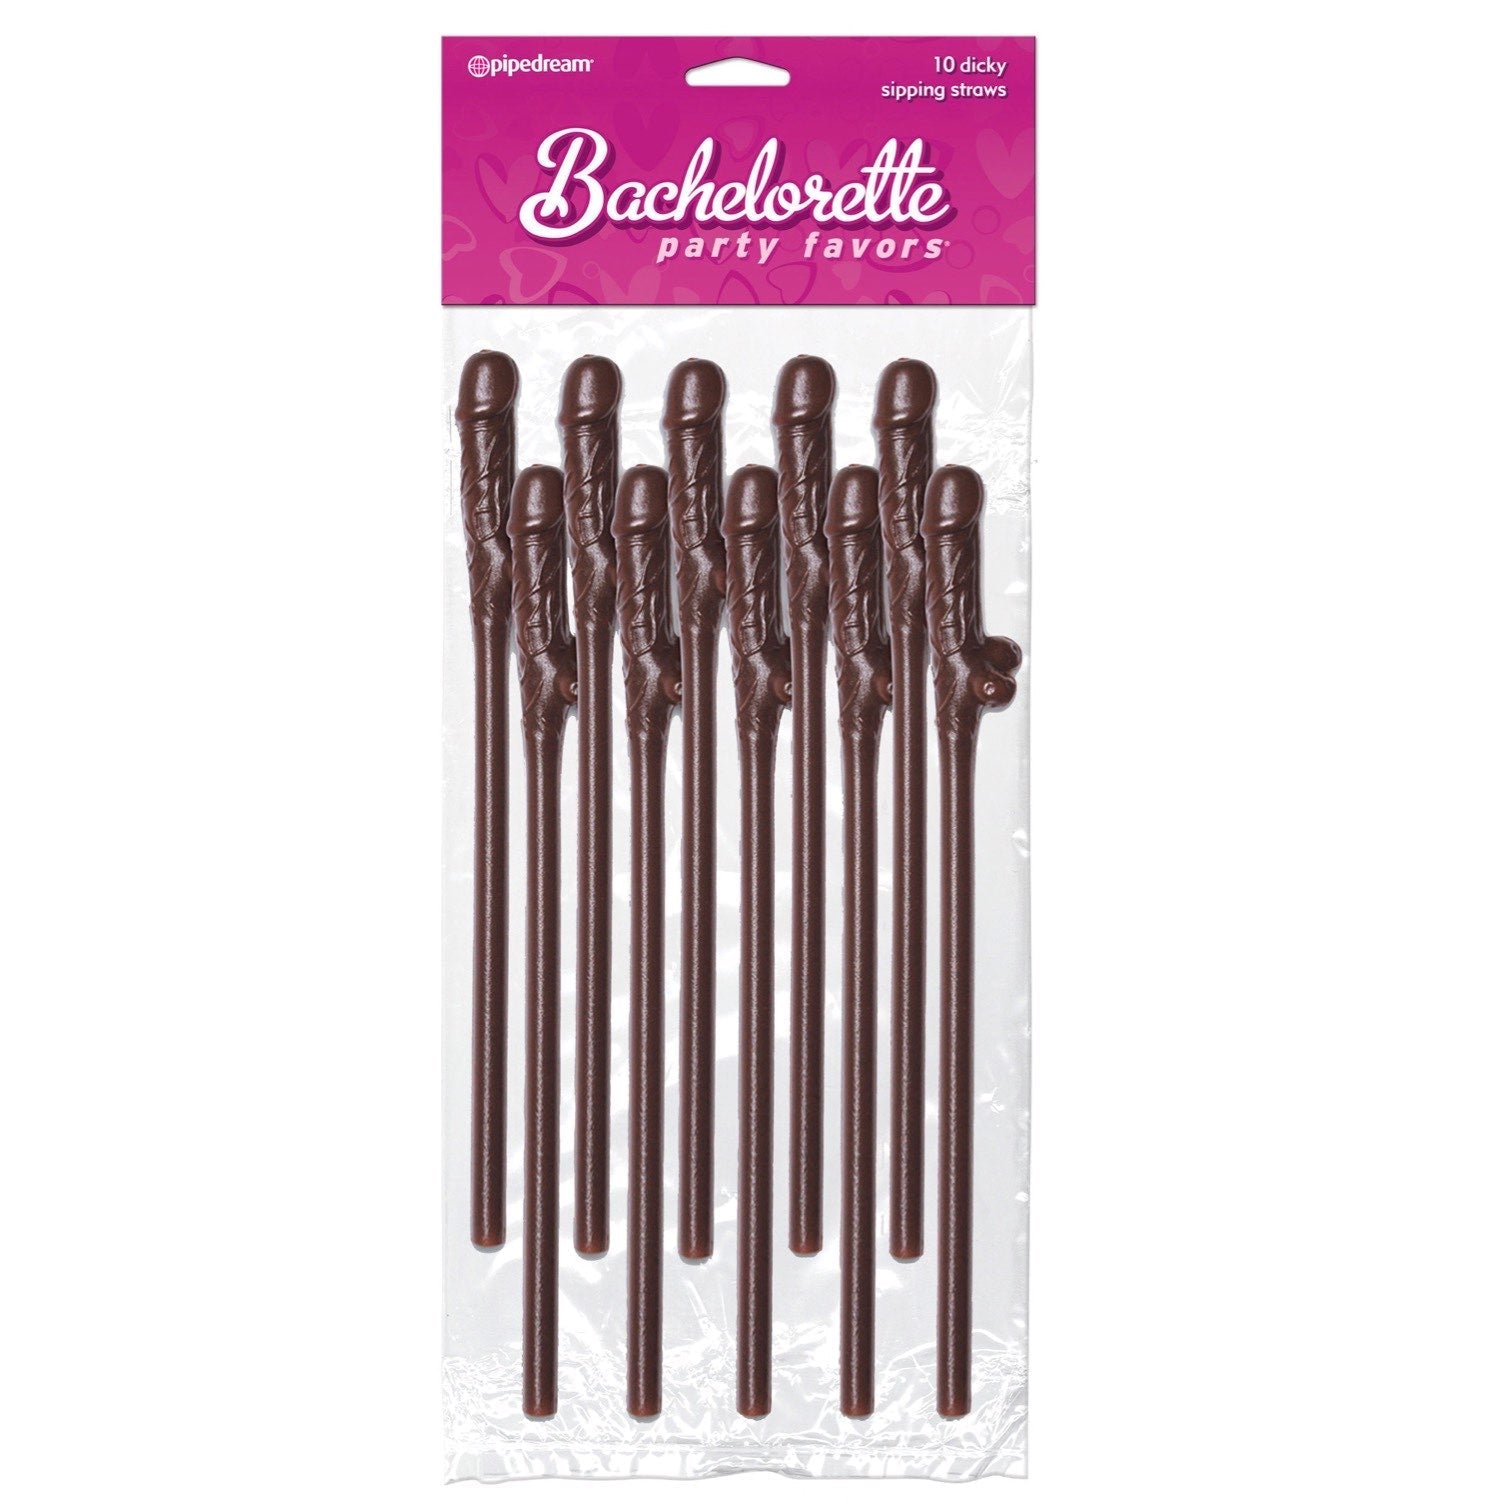 Bachelorette Party Favors Dicky Sipping Straws - Chocolate Coloured Straws - Set of 10 by Pipedream